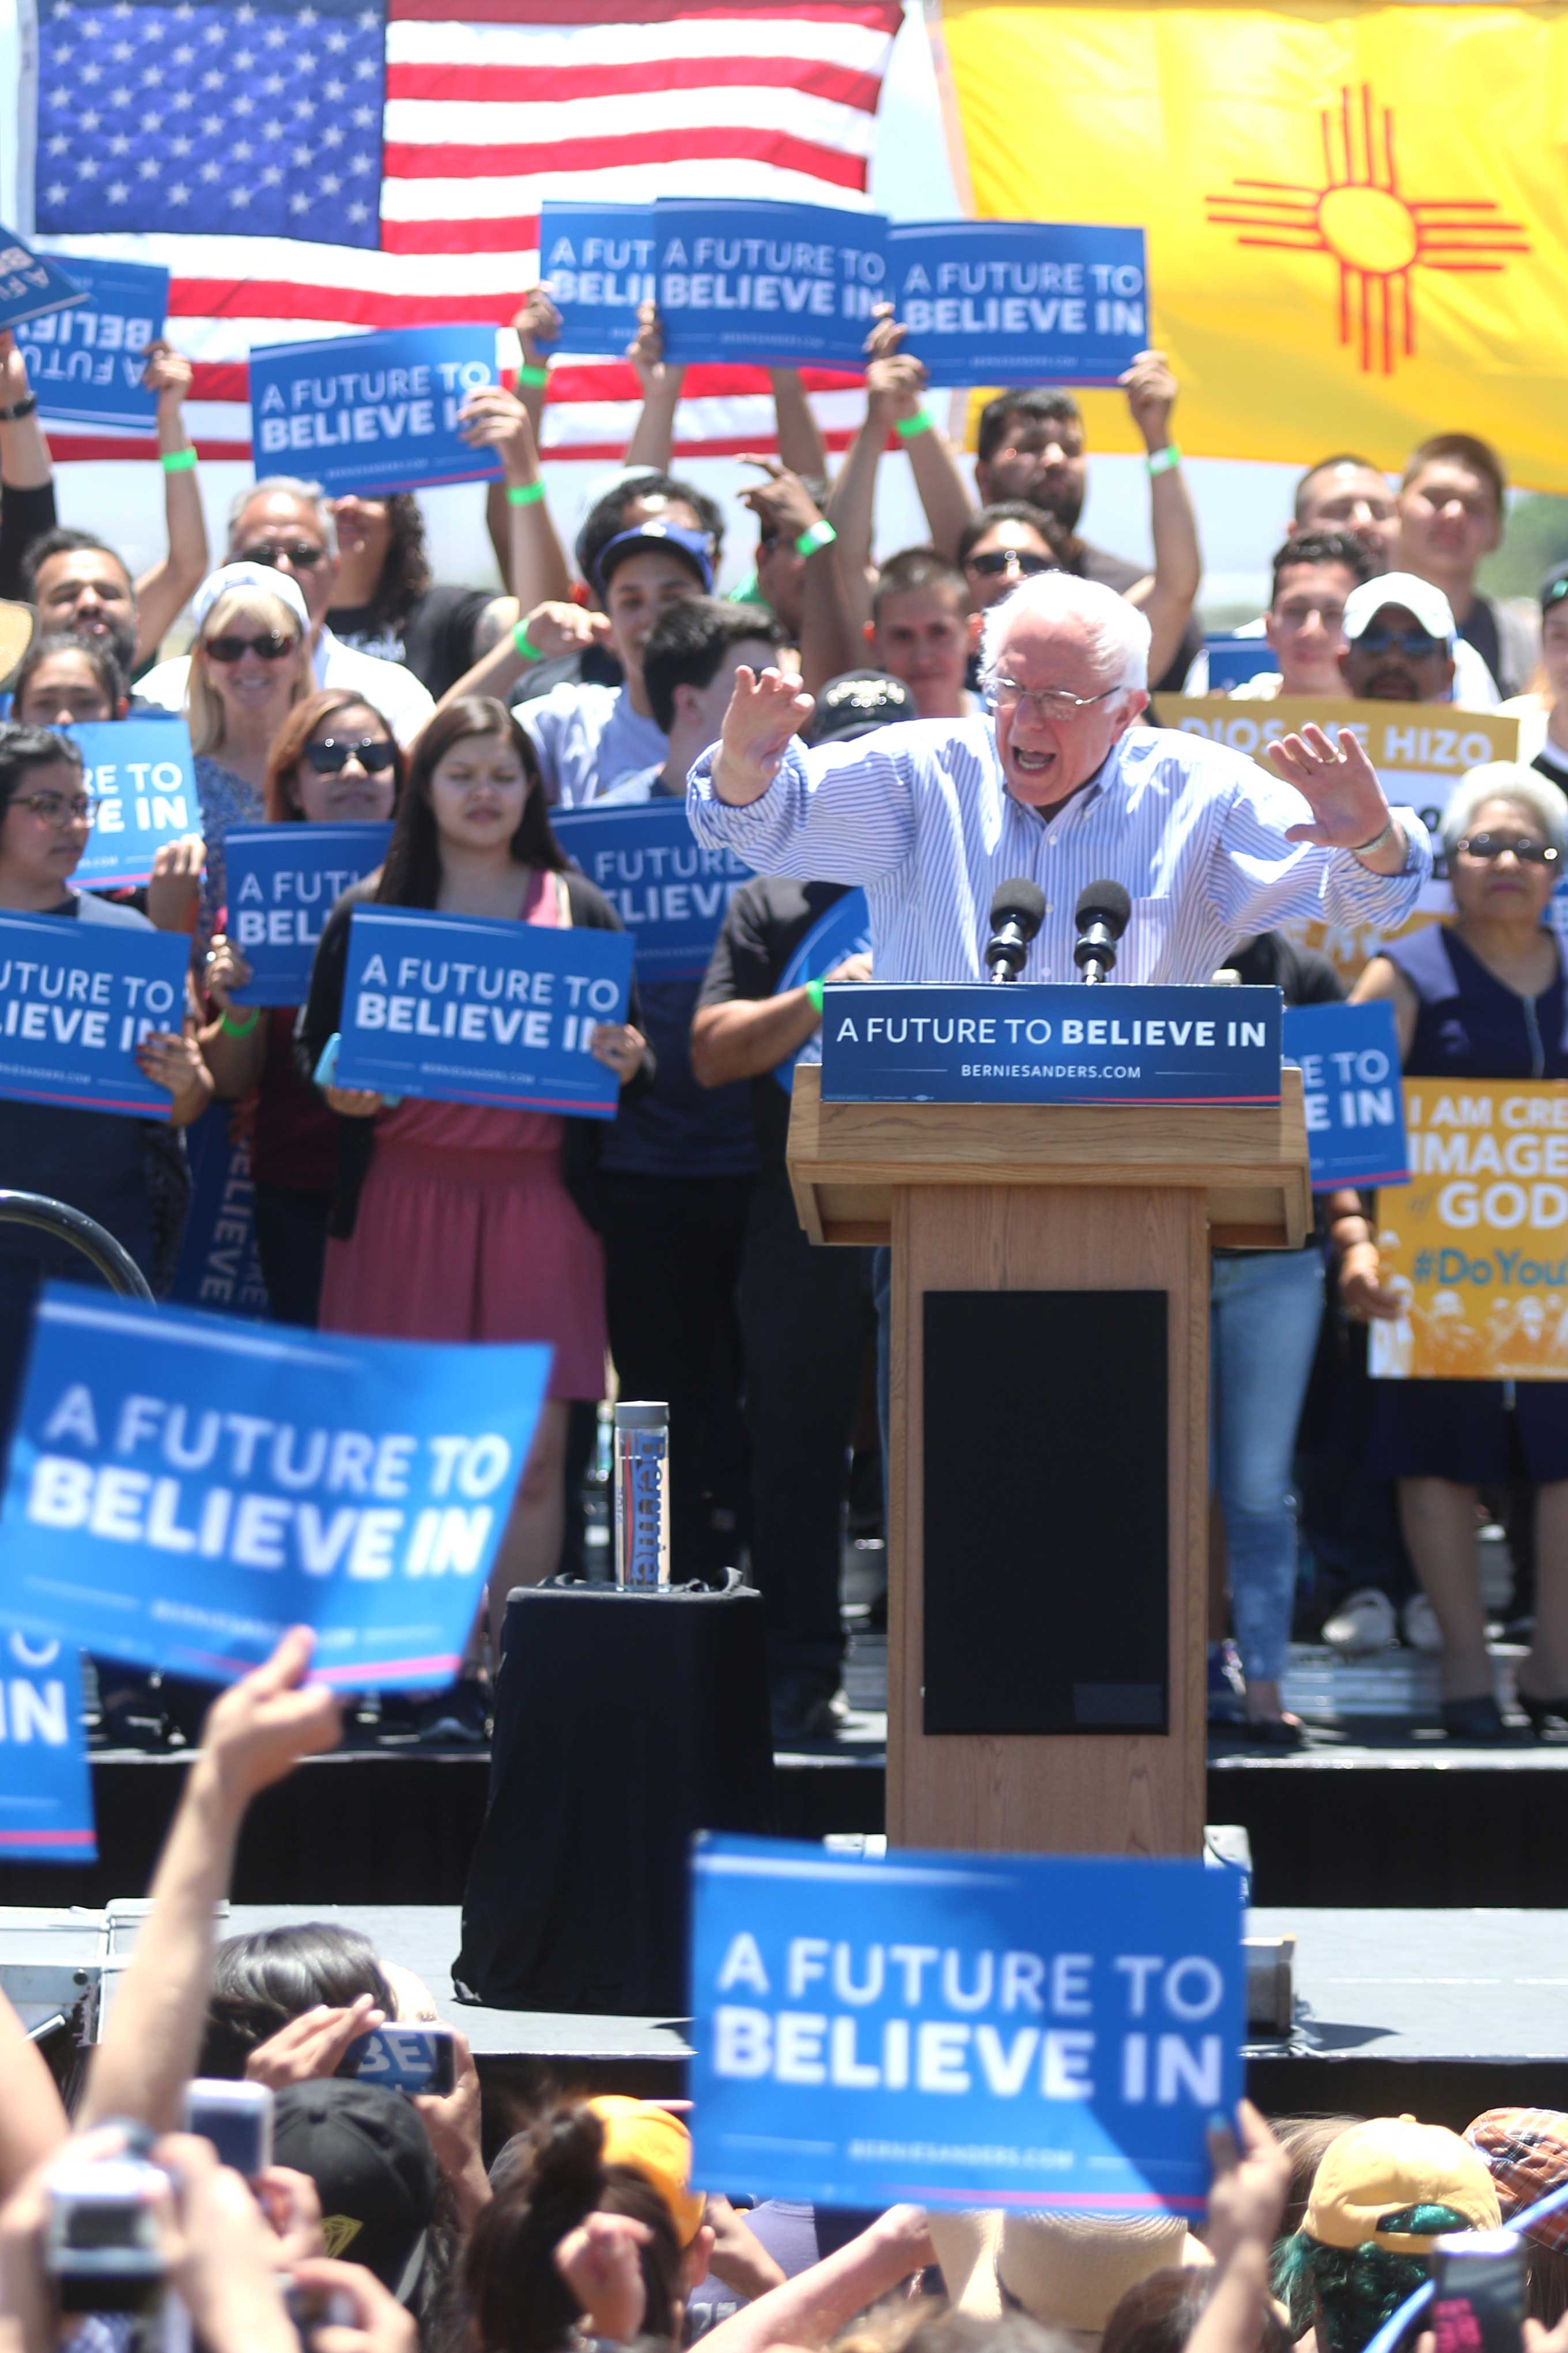 Sanders+visits+Vado+before+New+Mexico+primary